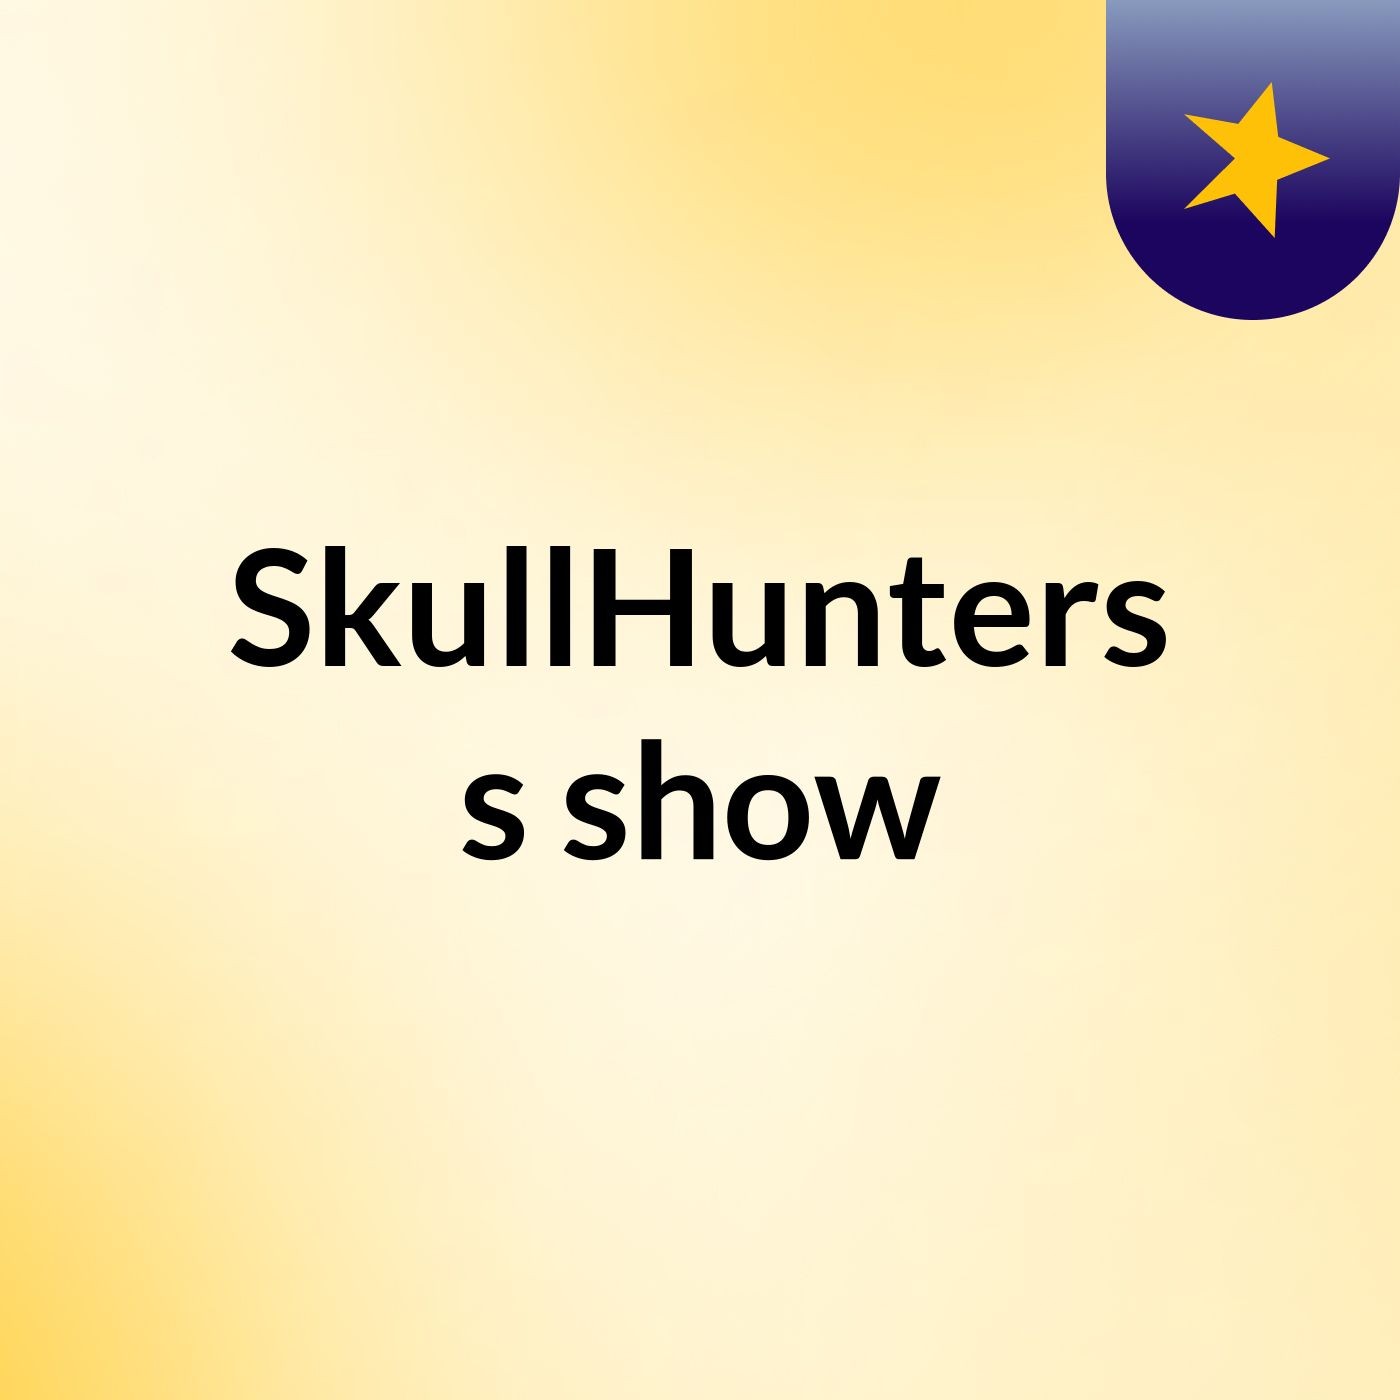 SkullHunters's show